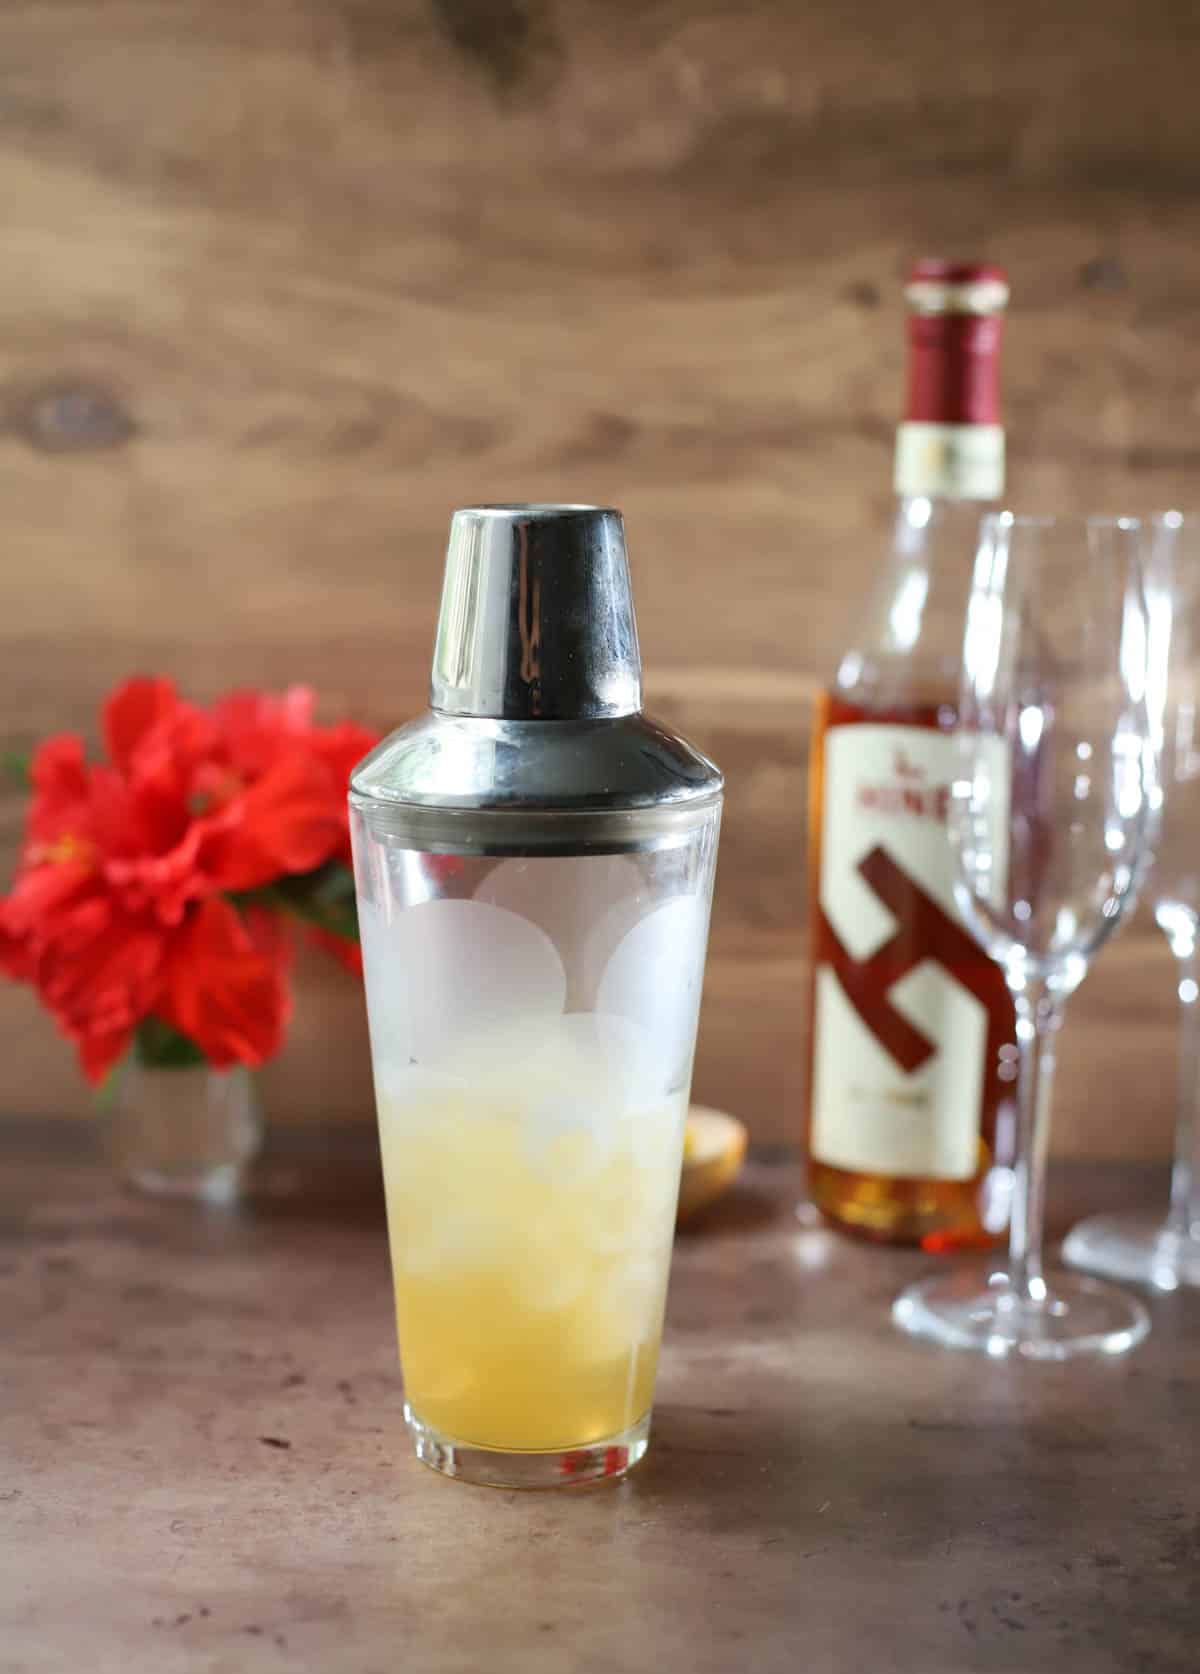 Shaker of French 75 cocktail on dark table with wood background with bottle and flowers behind.